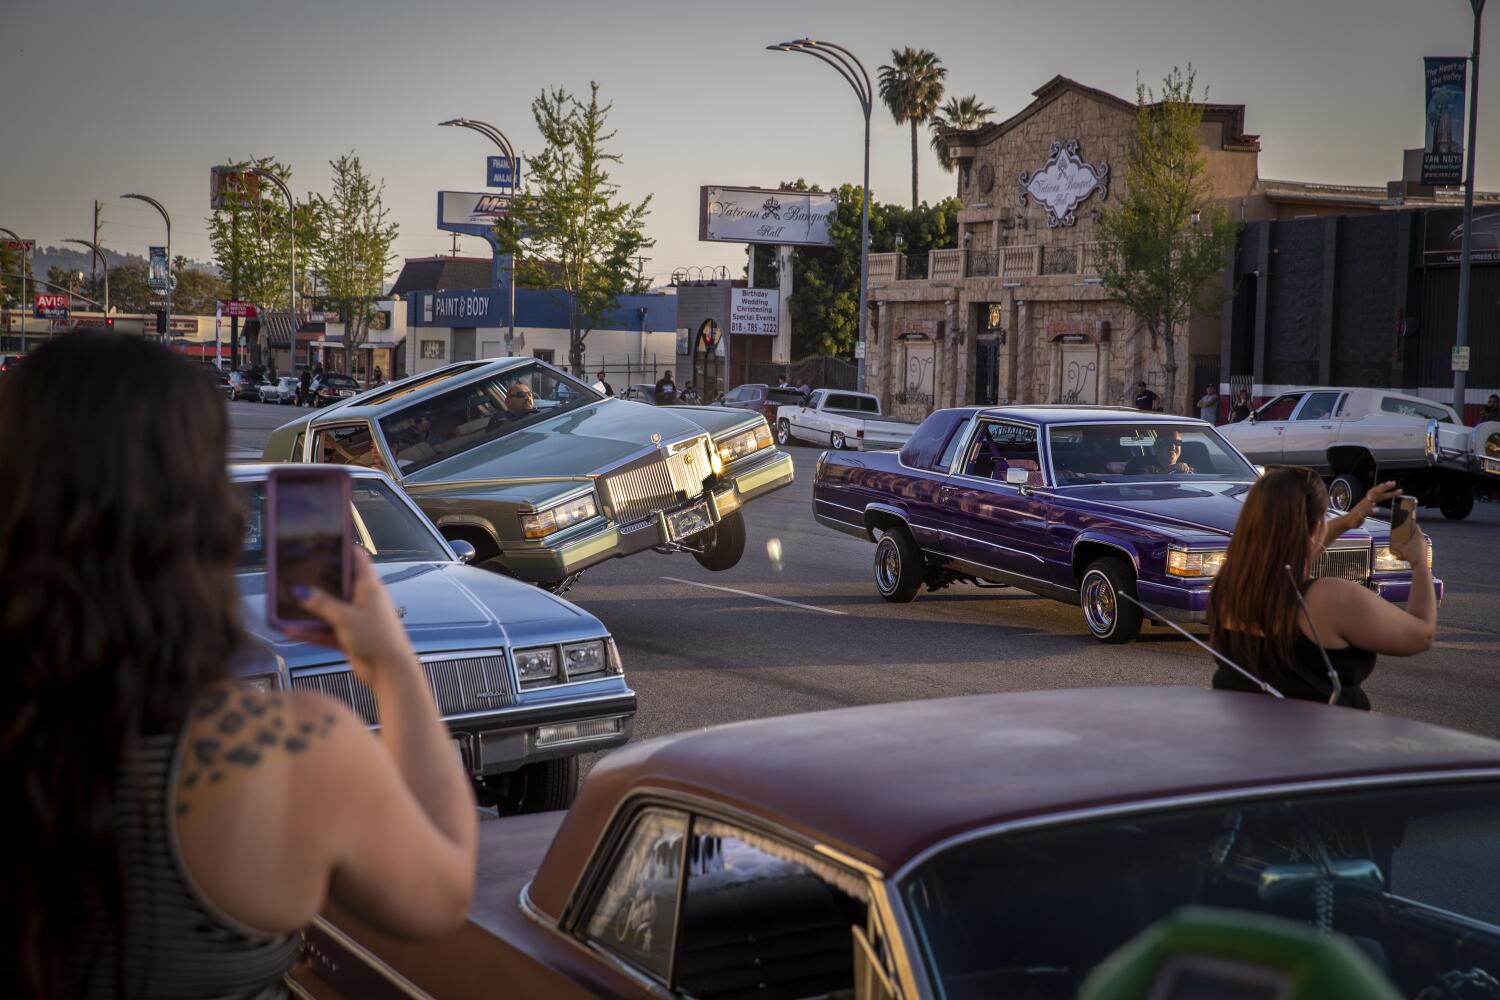 Cruising is back. A new law has made lowriders legit